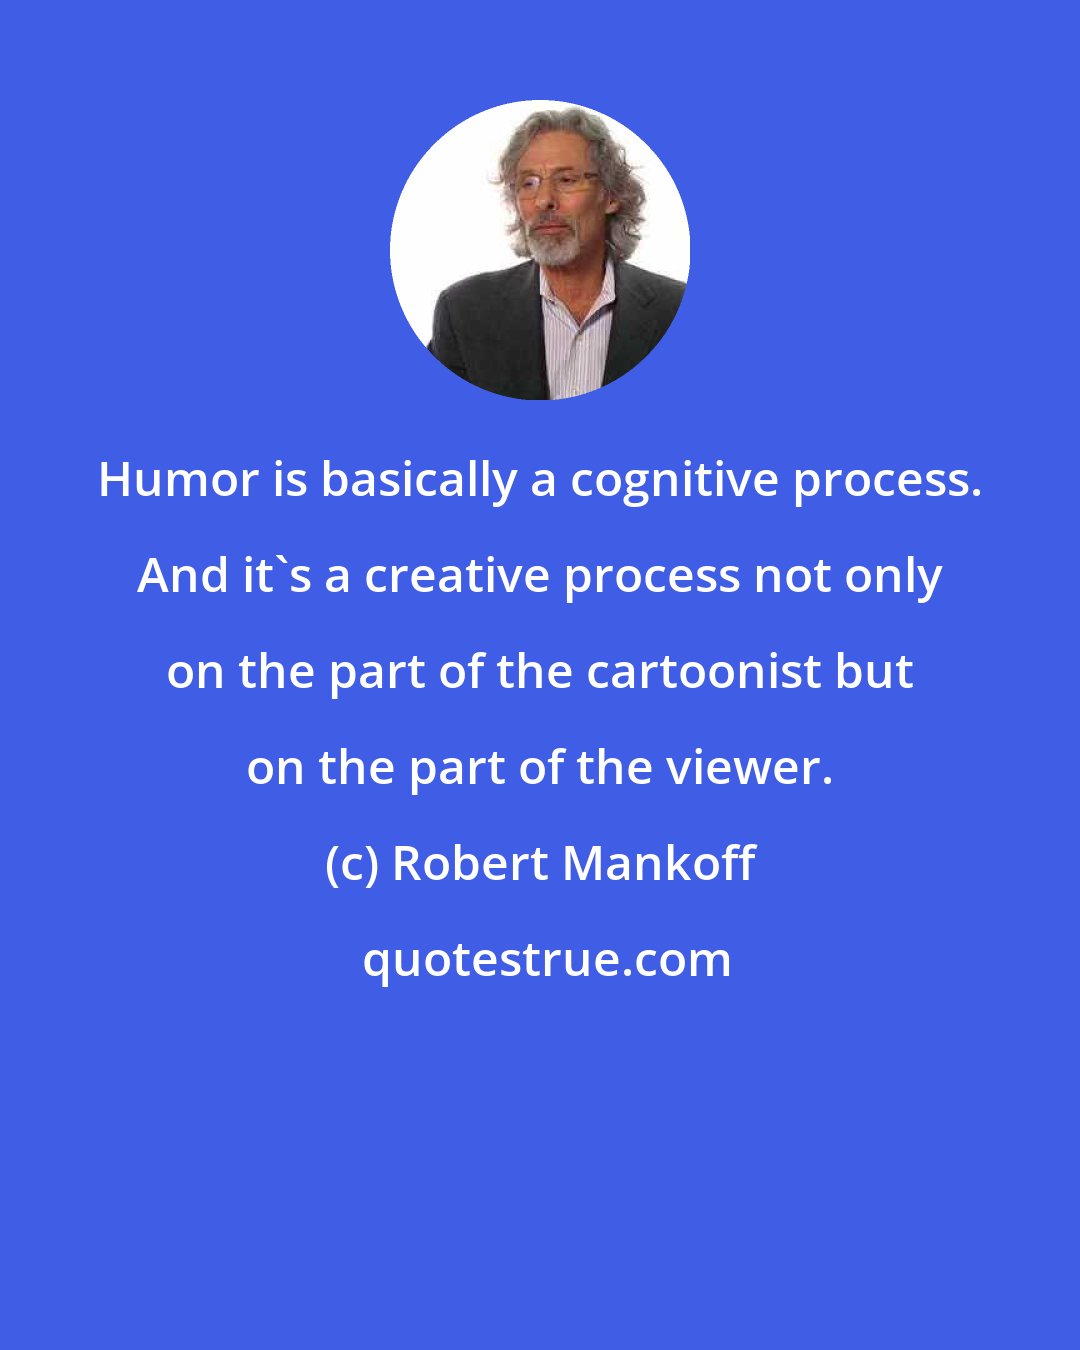 Robert Mankoff: Humor is basically a cognitive process. And it's a creative process not only on the part of the cartoonist but on the part of the viewer.